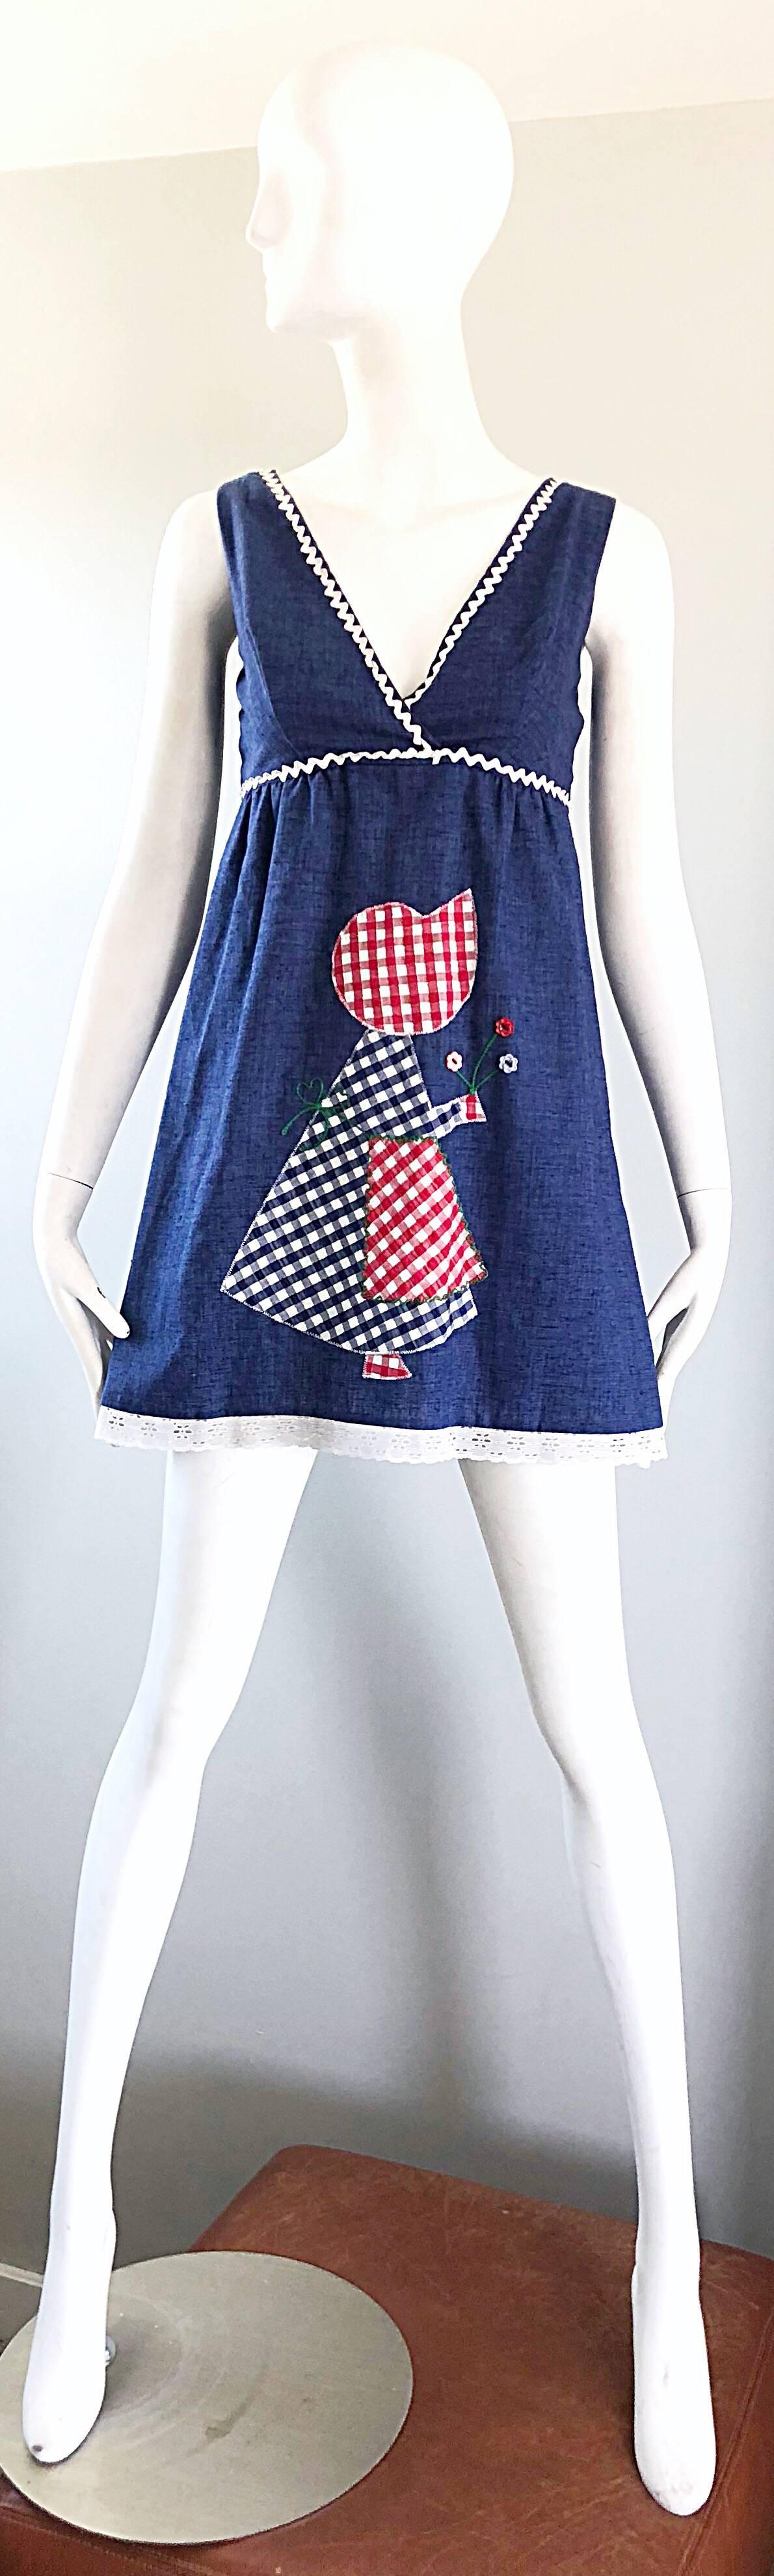 Chic vintage early 70s Holly Hobbie themed denim embroidered mini dress! Features an embroidered patch in the shape of Holly Hobbie in red, white and blue gingham checks. White ric rac on the bodice trim. White lace hem. Full metal zipper up the